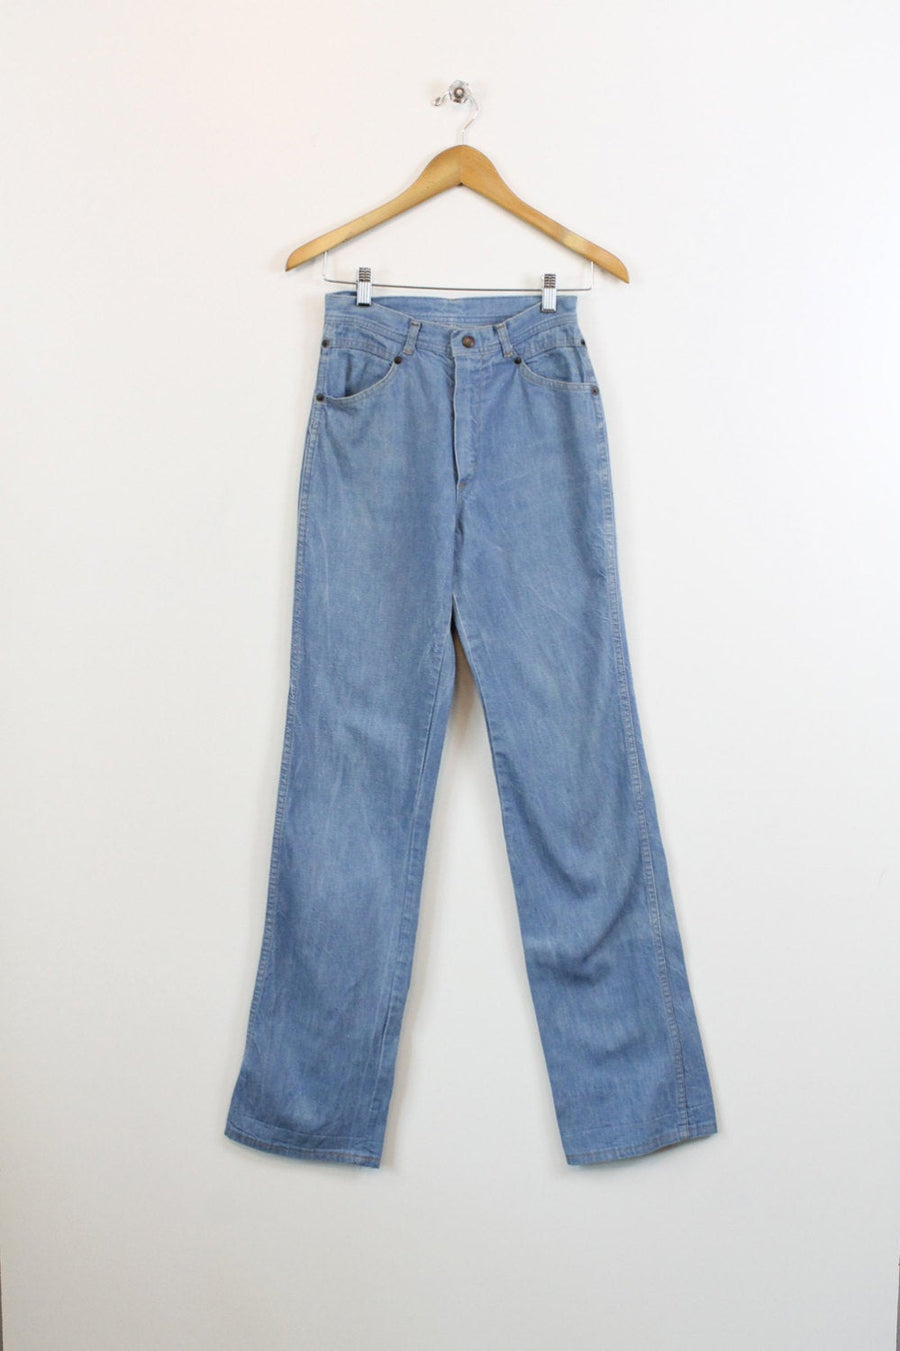 1970s high rise jeans 26